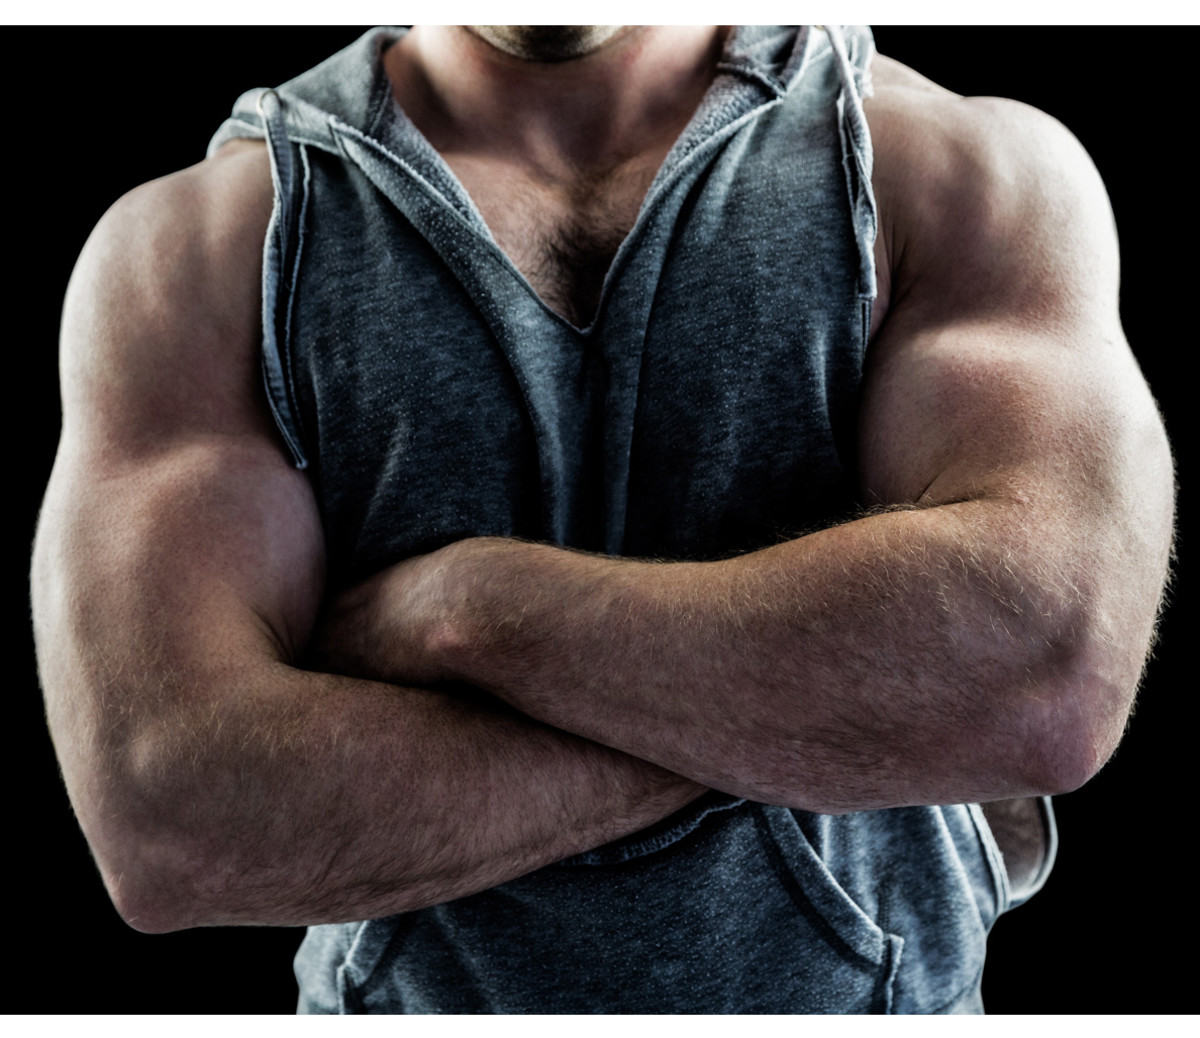 10 Exercises That Work Your Arms to Exhaustion - Men's Journal